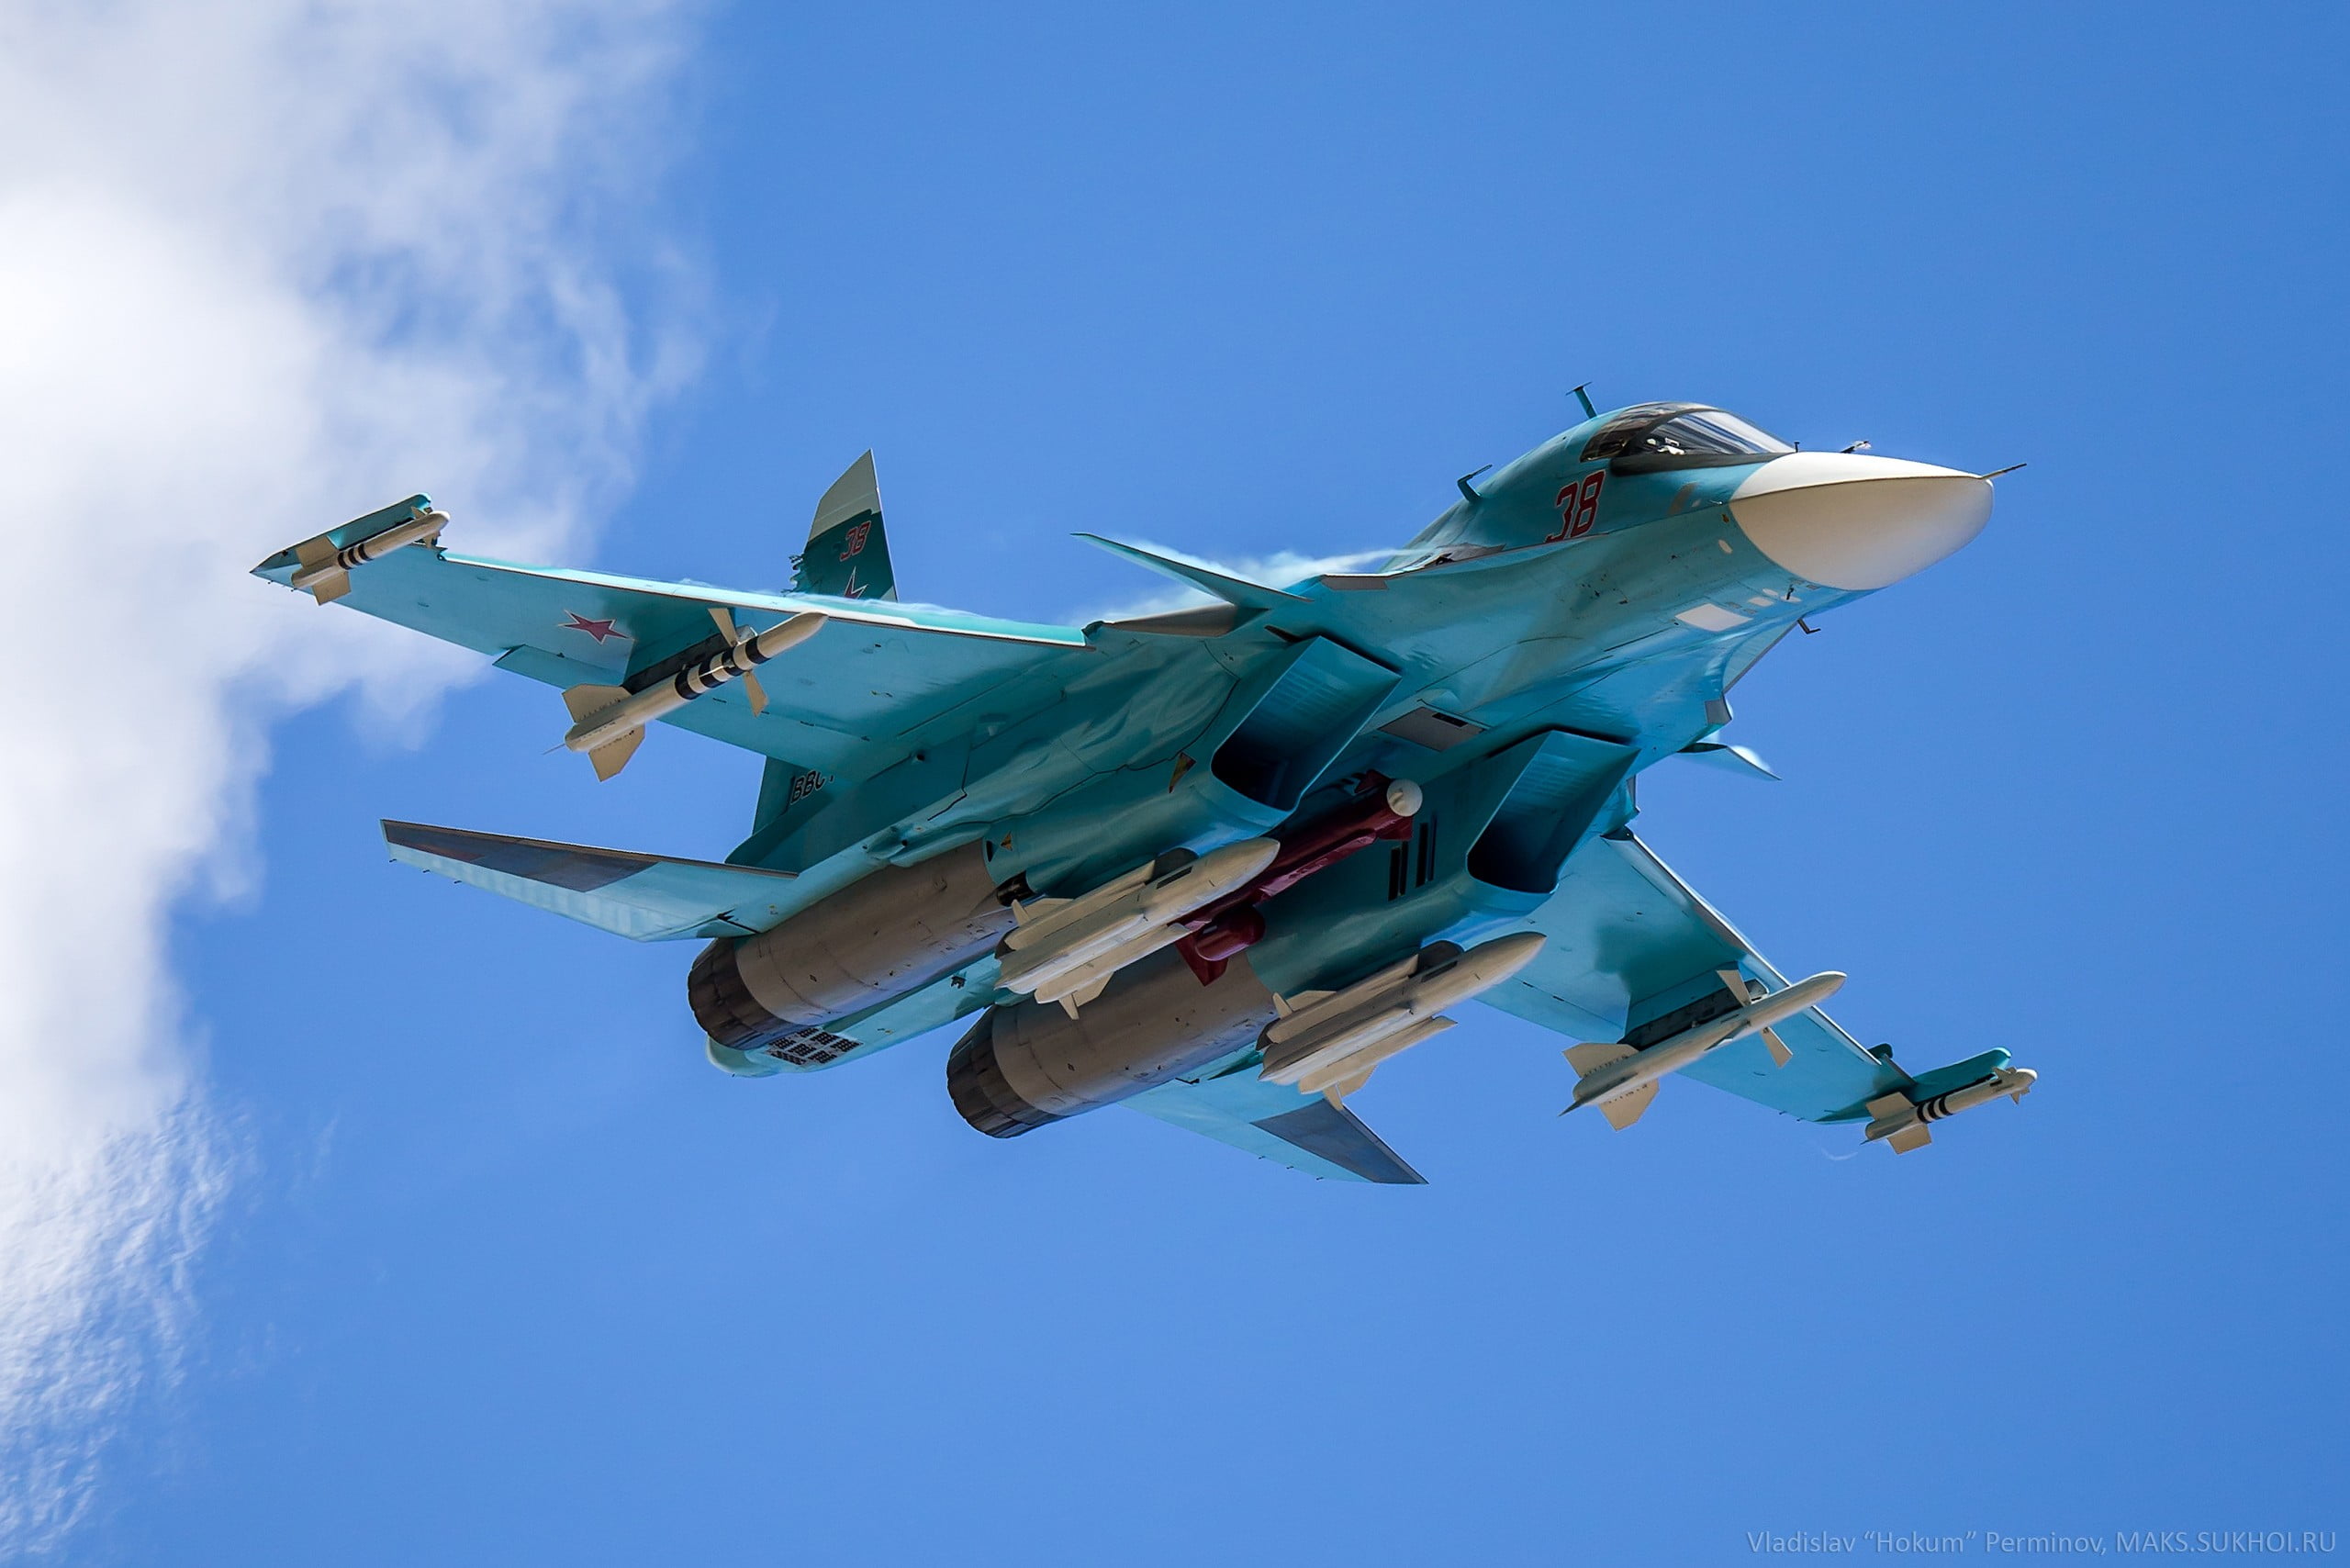 blue and white jet fighter, aircraft, military aircraft, Sukhoi Su-34, Russian Army